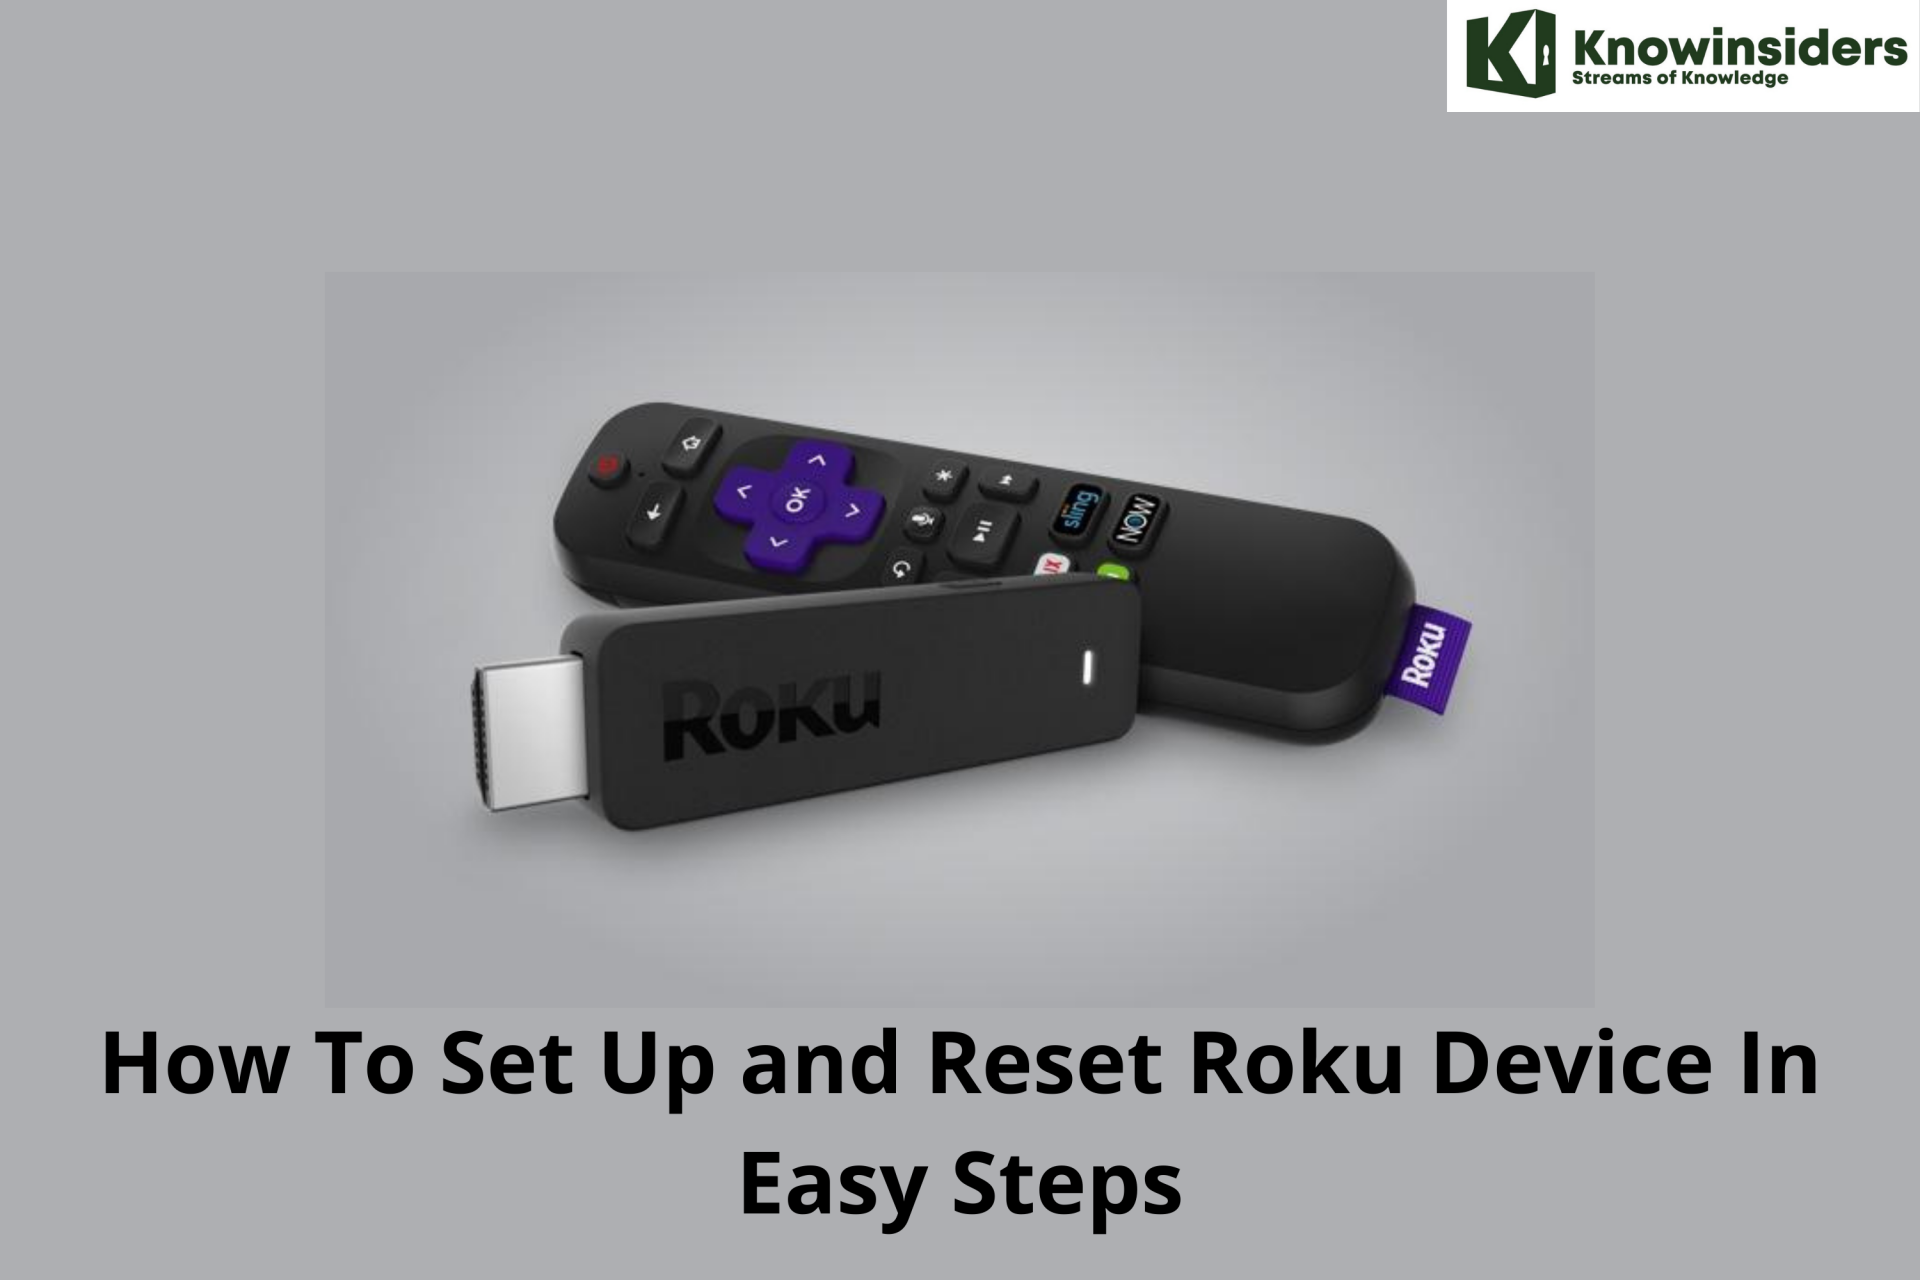 How To Set Up and Reset Roku Device In Easy Steps and Without Remote